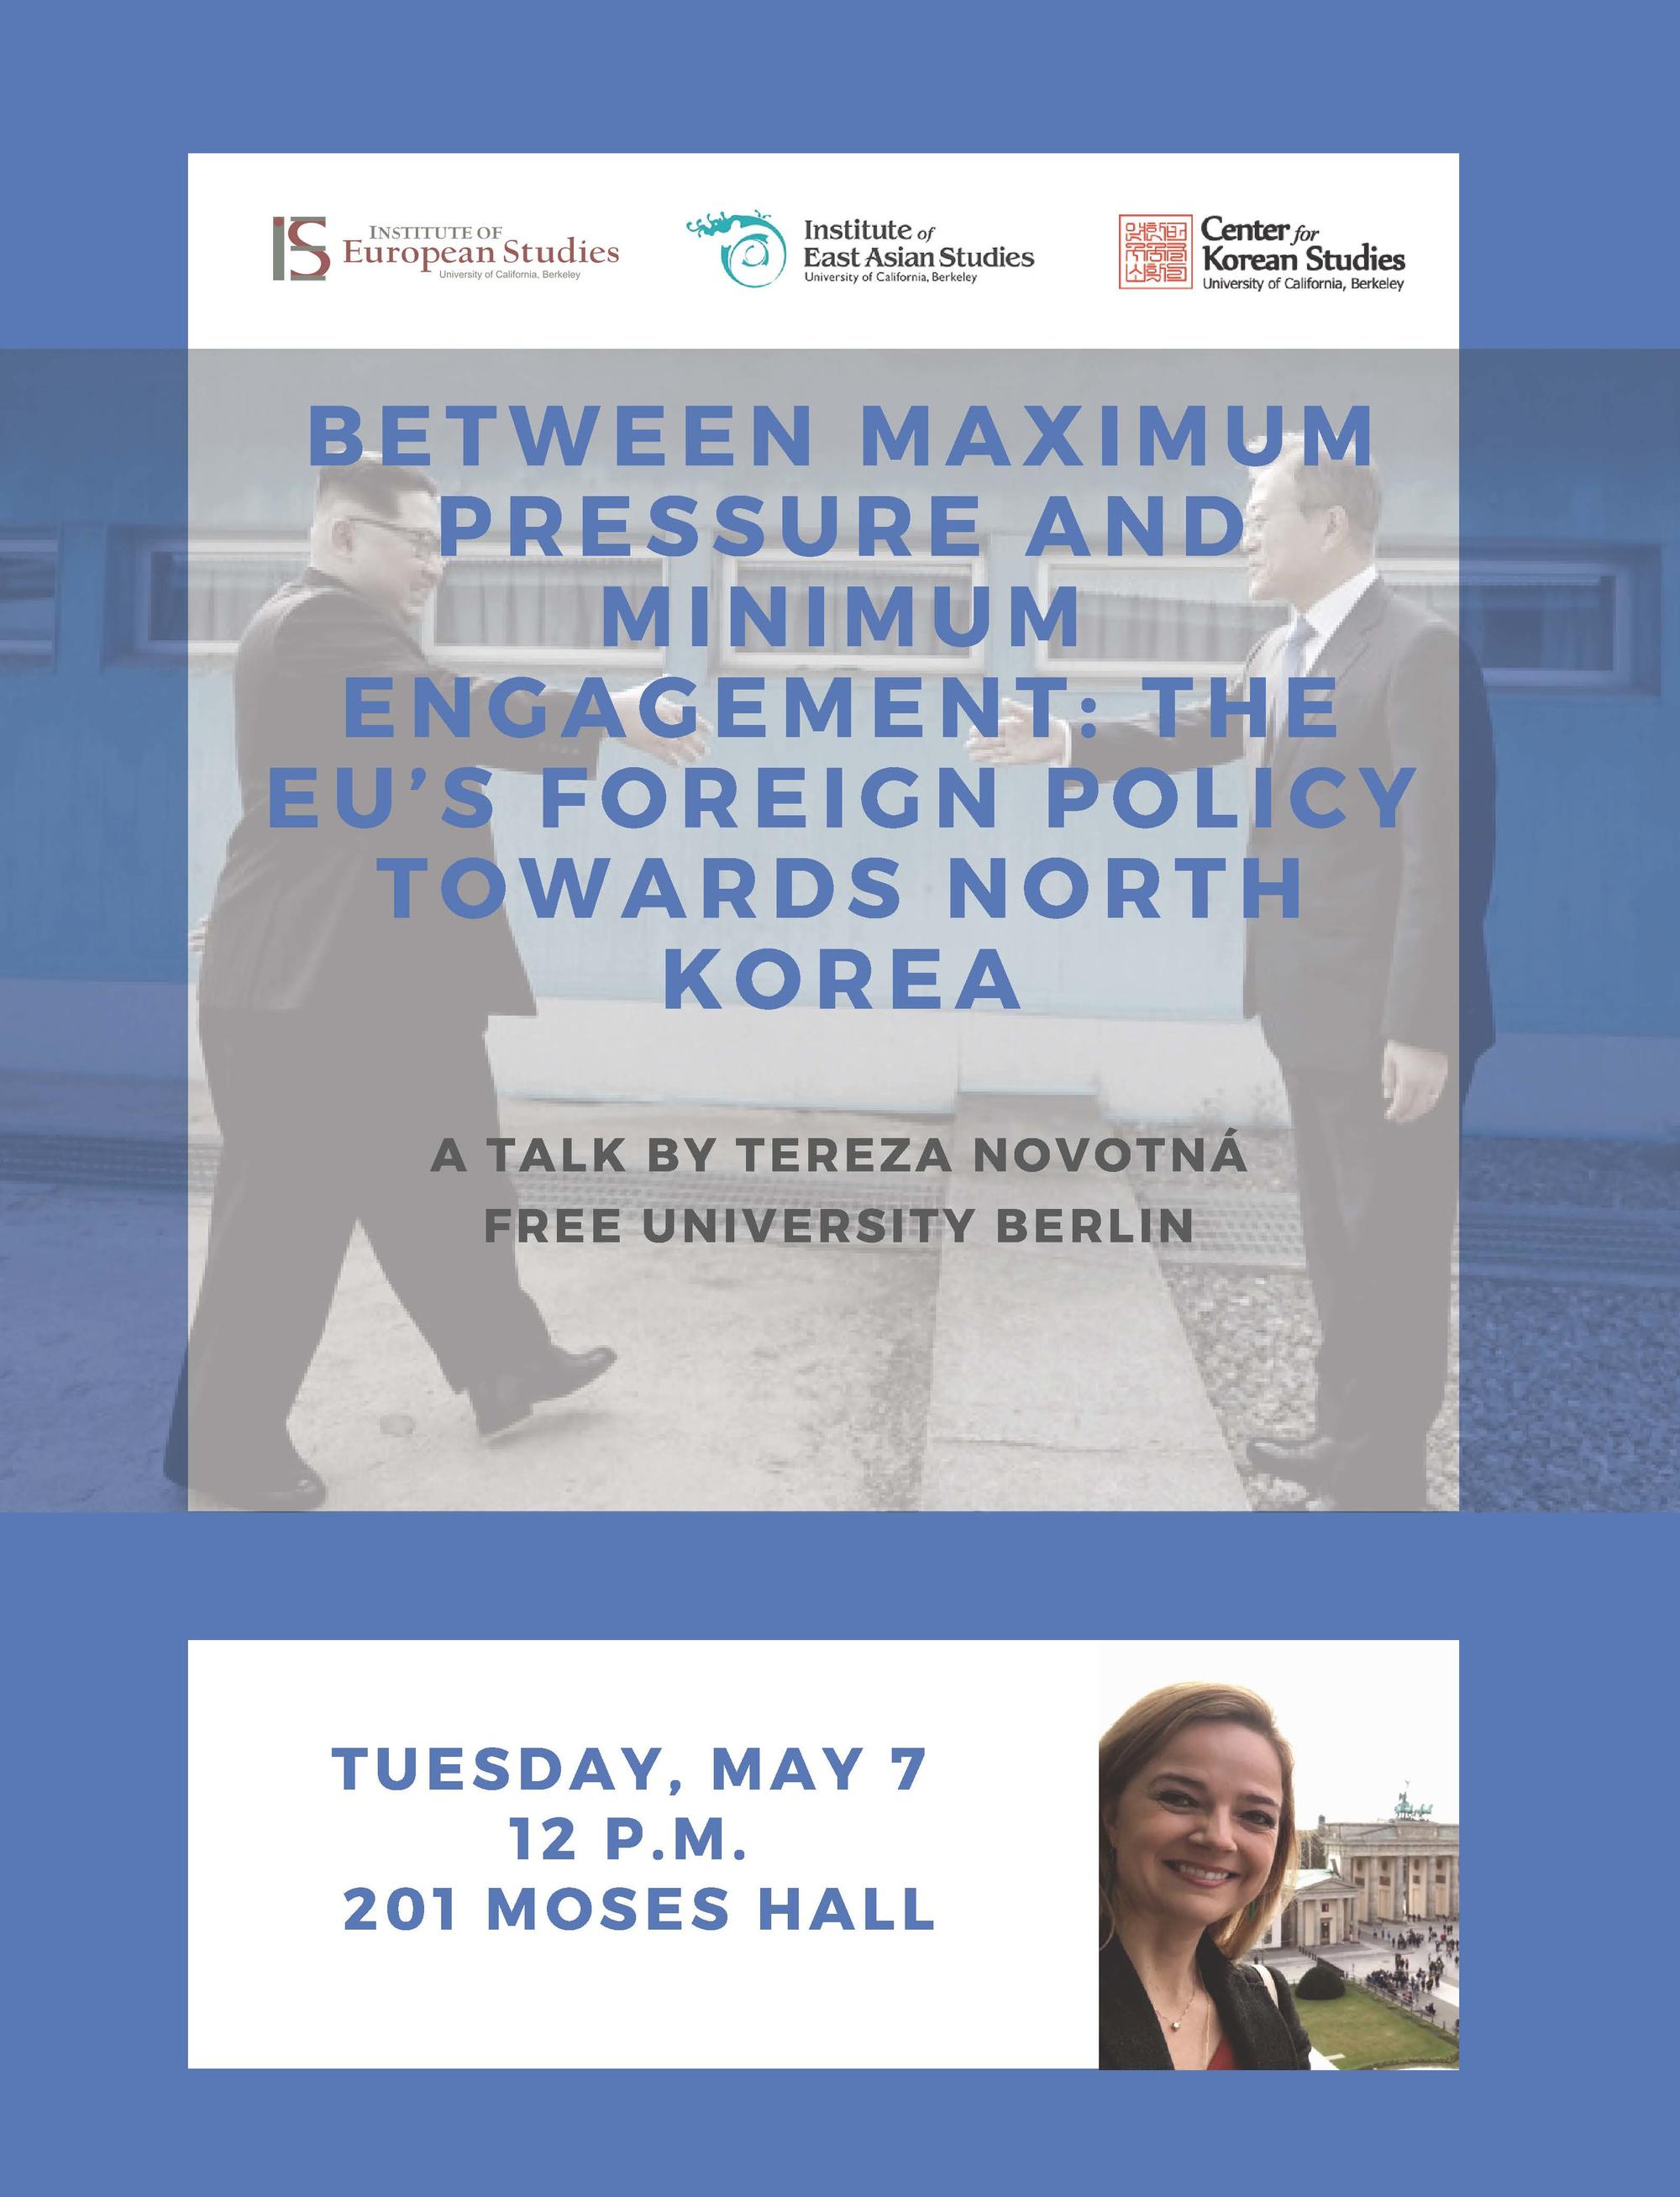 Lecture at the University of California, Berkeley on EU's Foreign Policy Towards North Korea